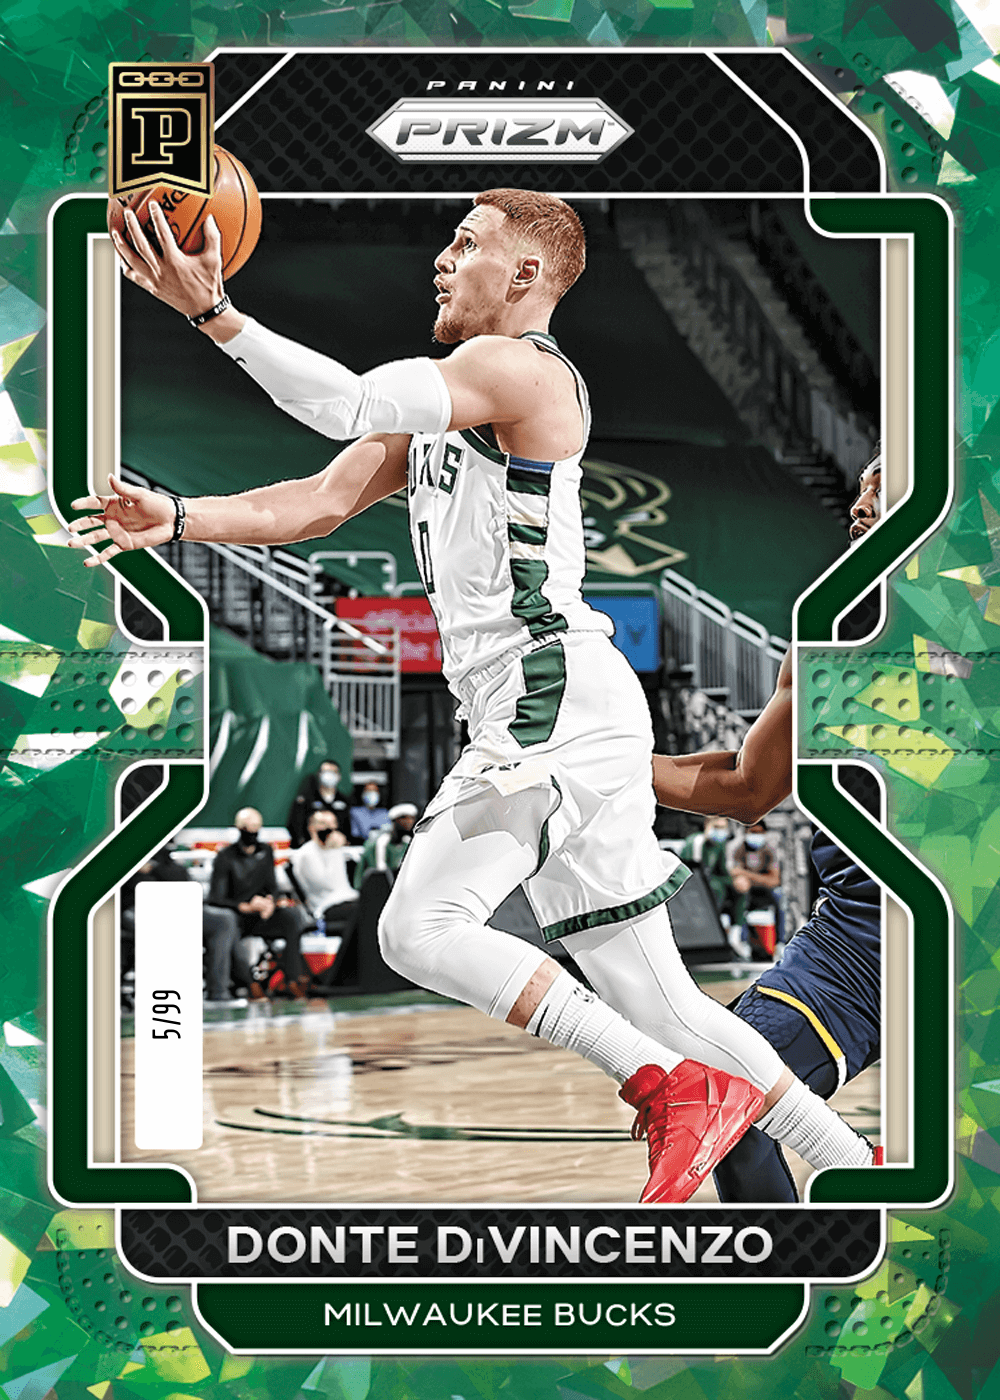 Donte DiVincenzo with a sick poster